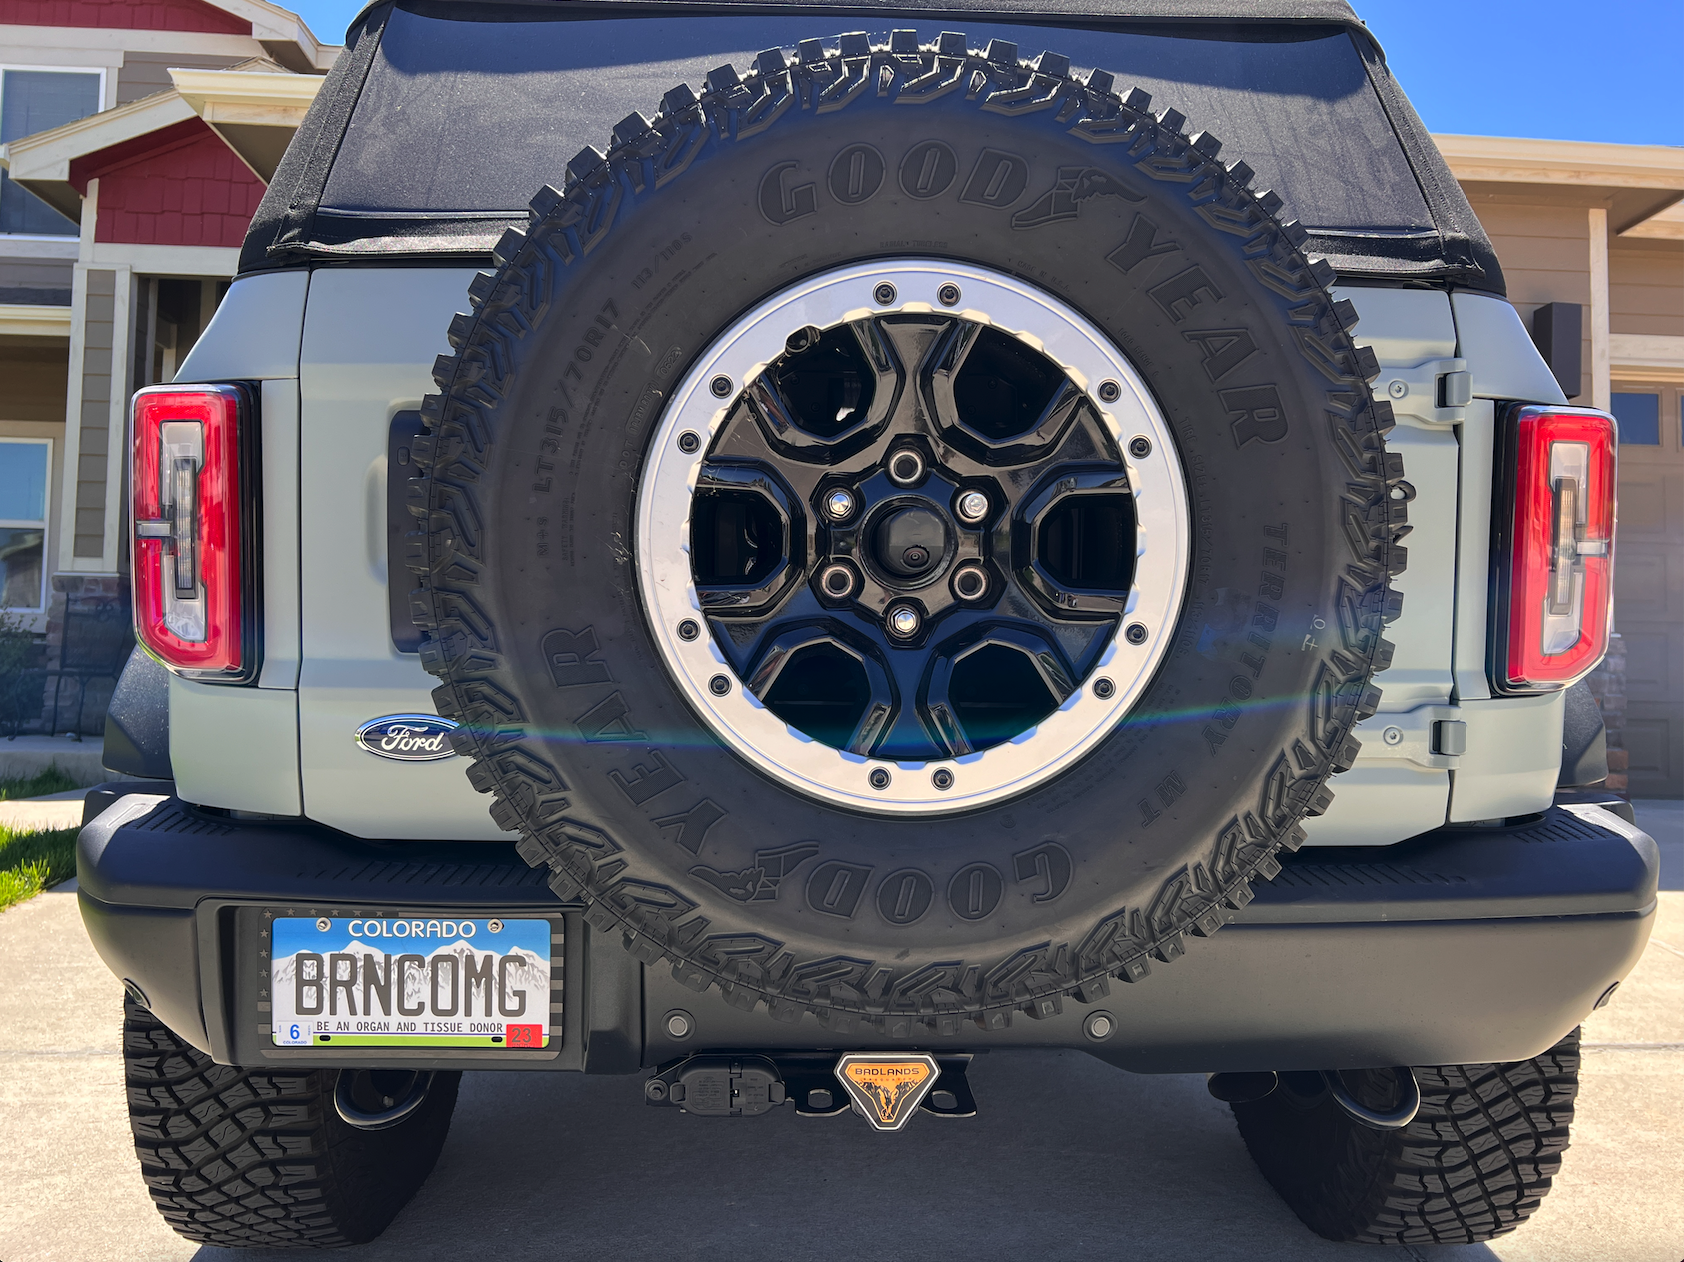 Ford Bronco Custom vanity license plate for your Bronco? 1655334453228